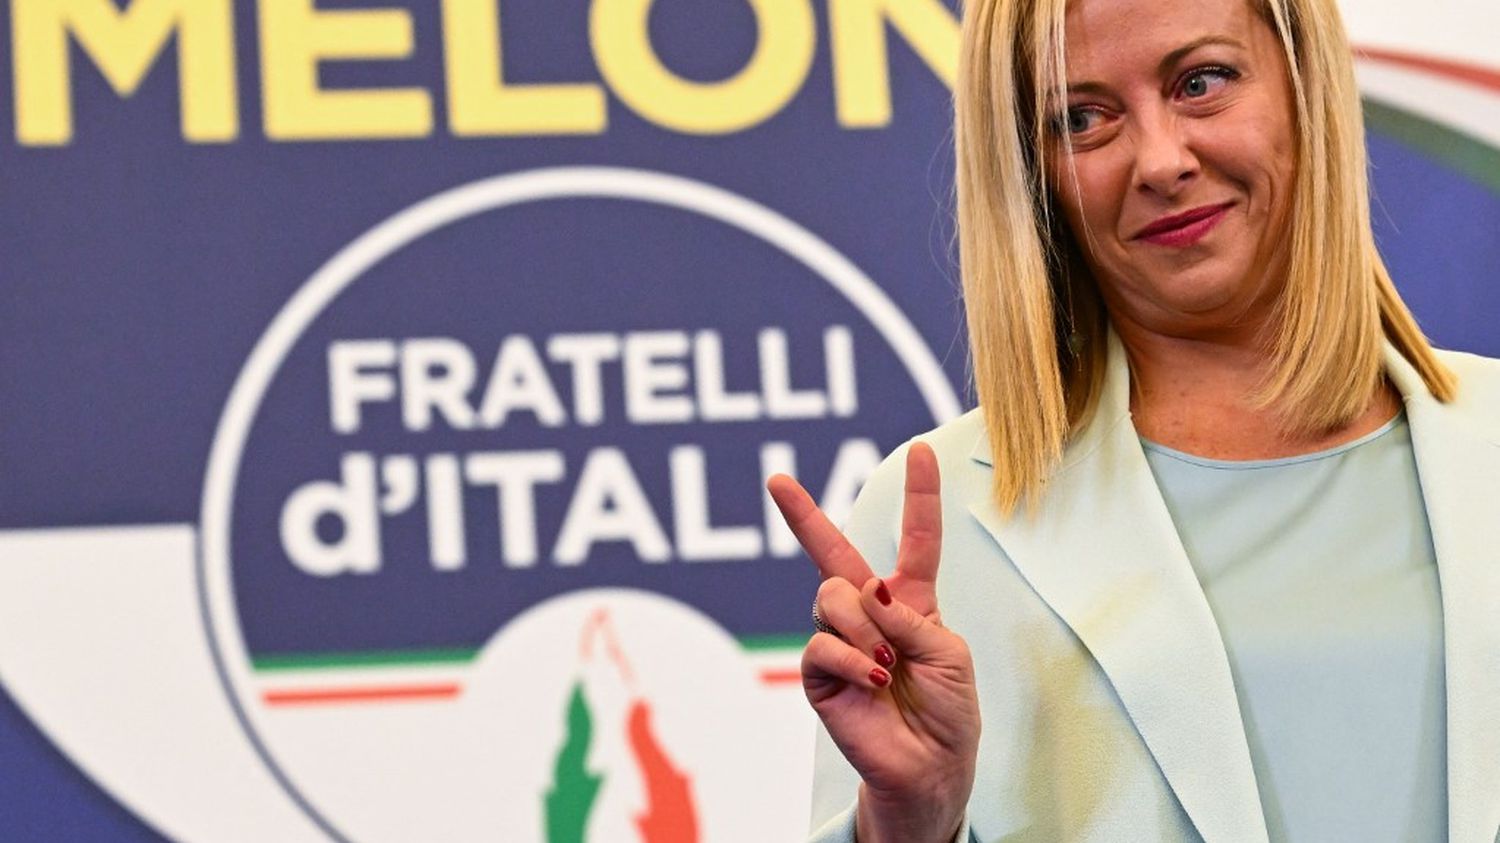 Elections in Italy: will Giorgia Meloni manage to govern alone?
